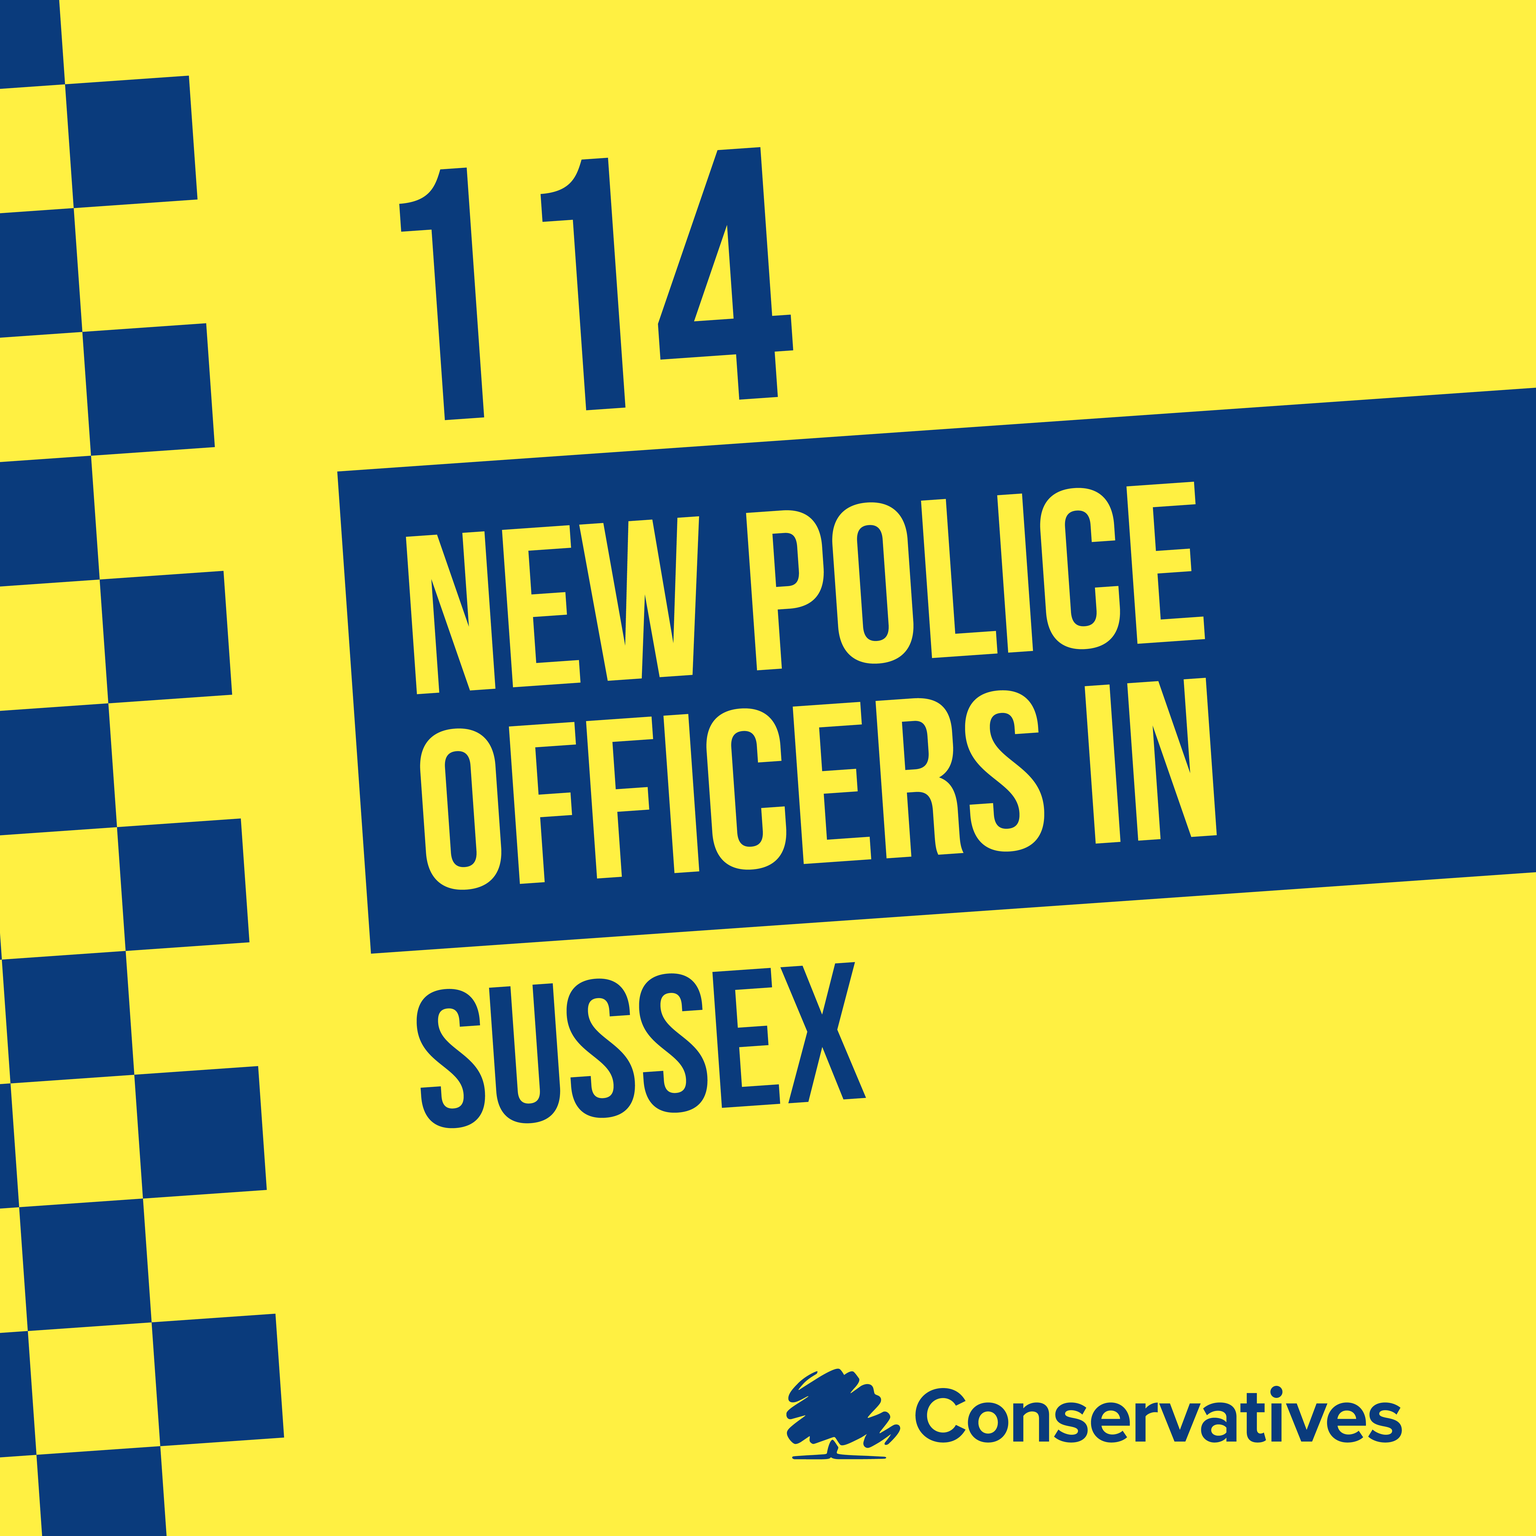 More police in sussex